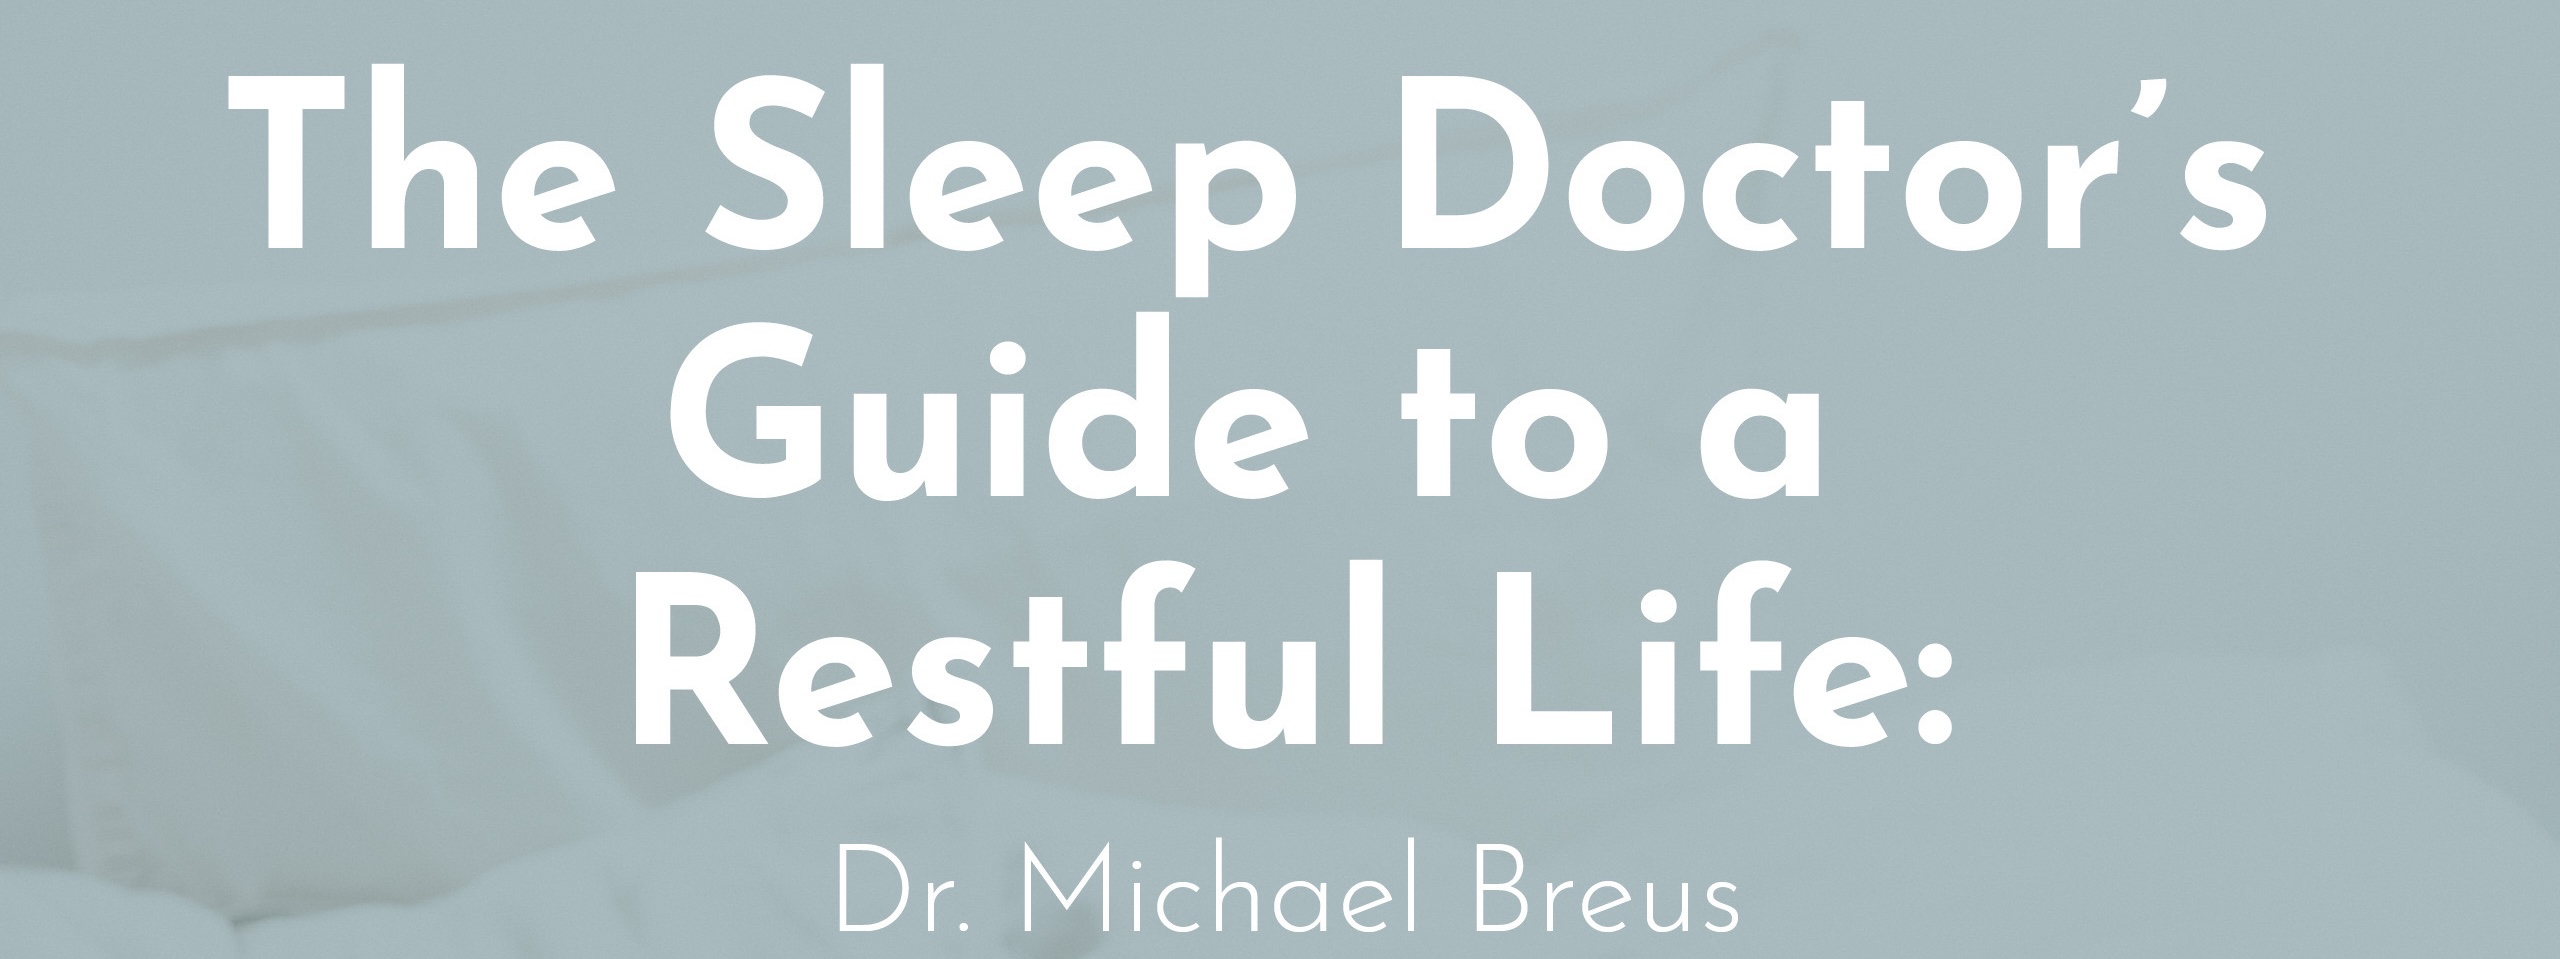 The Sleep Doctors Guide To A Restful Life Dr Michael Breus “the Sleep Doctor” Ageist 